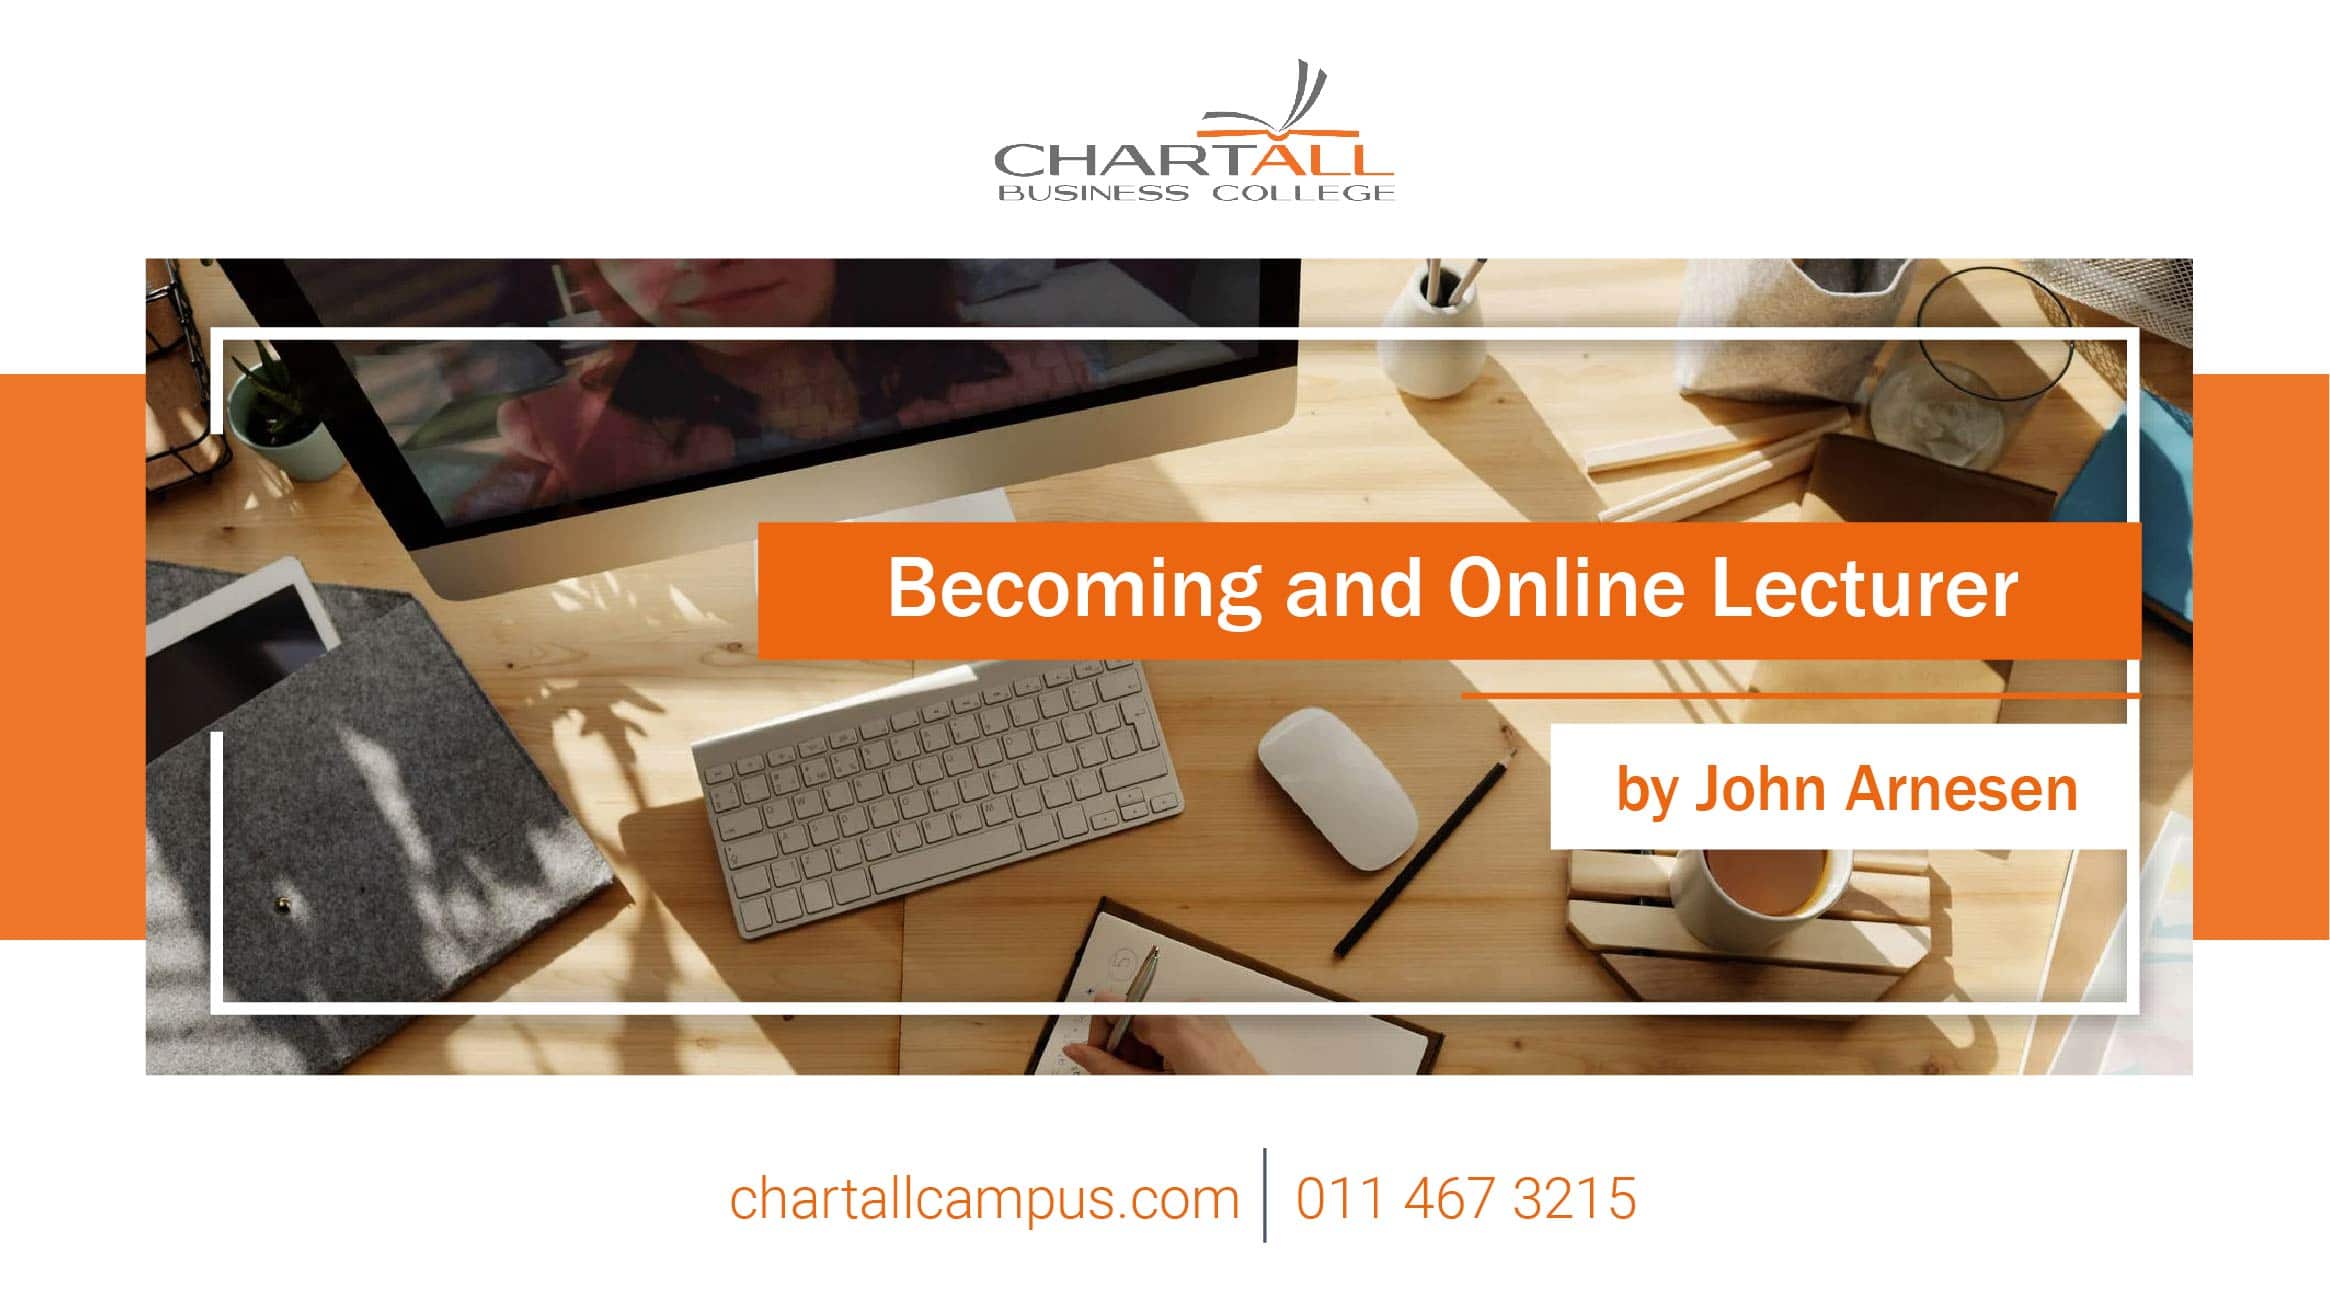 Becoming an Online Lecturer